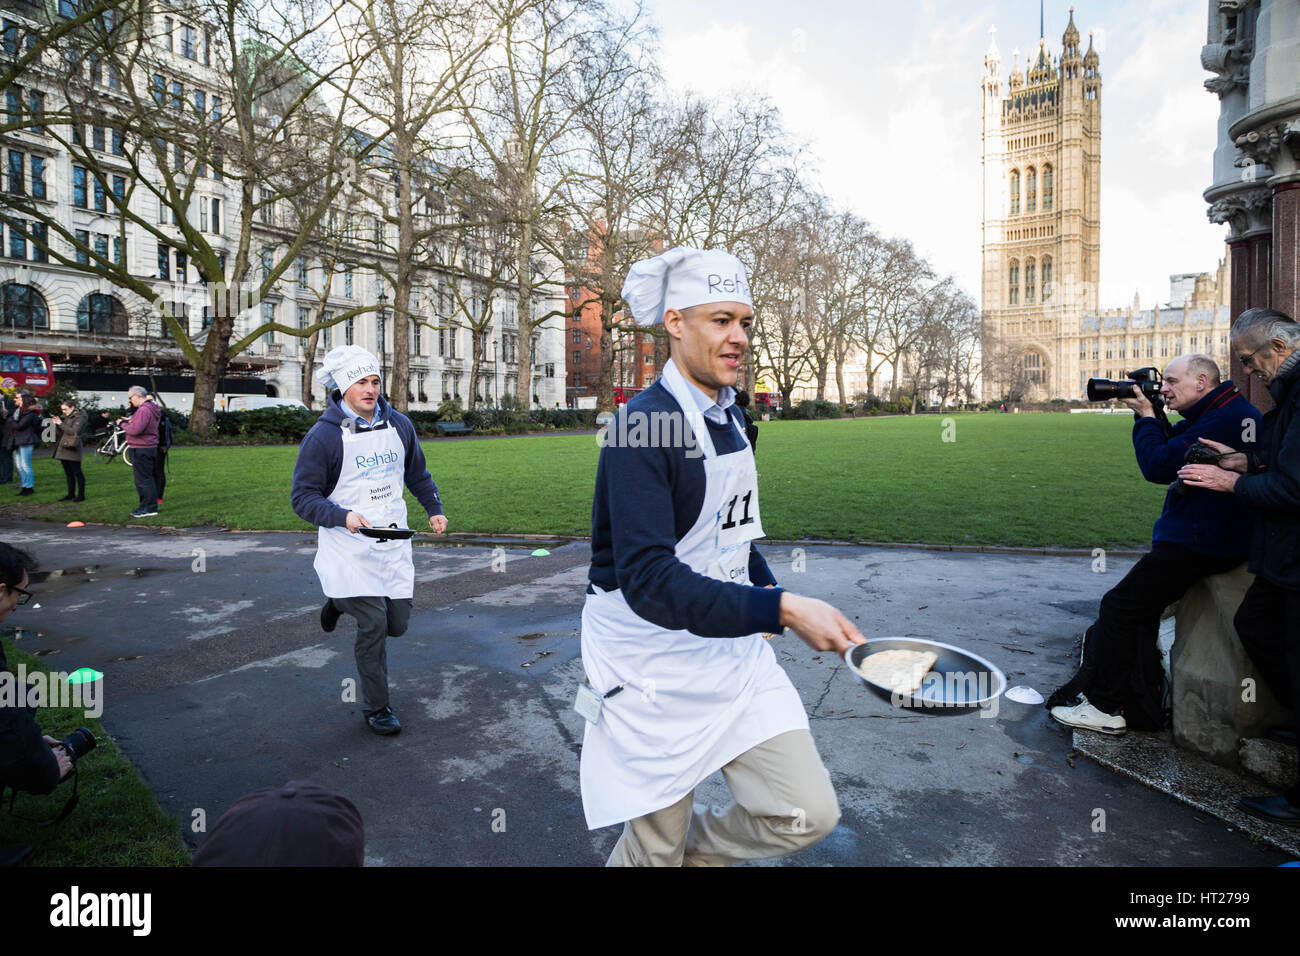 Johnny Mercer, MP for Plymouth (L) and Clive Lewis, MP for Norwich South (R). MPs, Lords and Media attend the 20th Annual Rehab Parliamentary Pancake Race at Victoria Gardens in Westminster, London, UK. Stock Photo